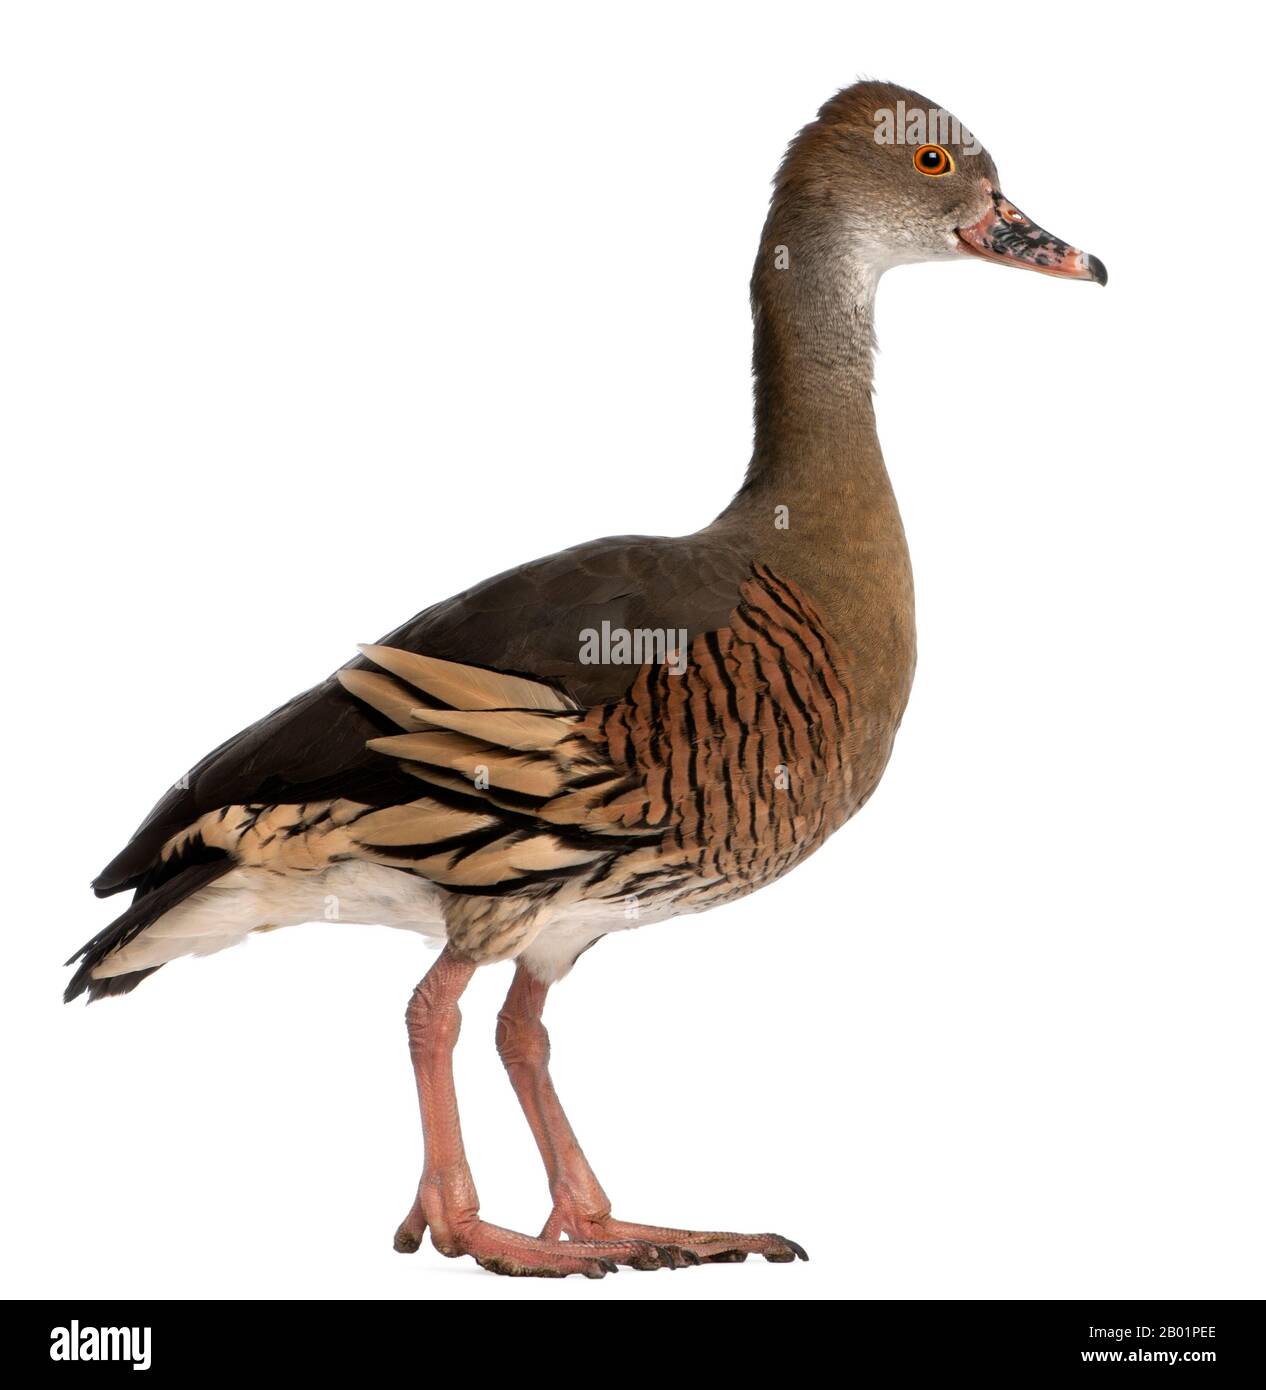 Fulvous Whistling Duck, Dendrocygna bicolor, in front of white background Stock Photo